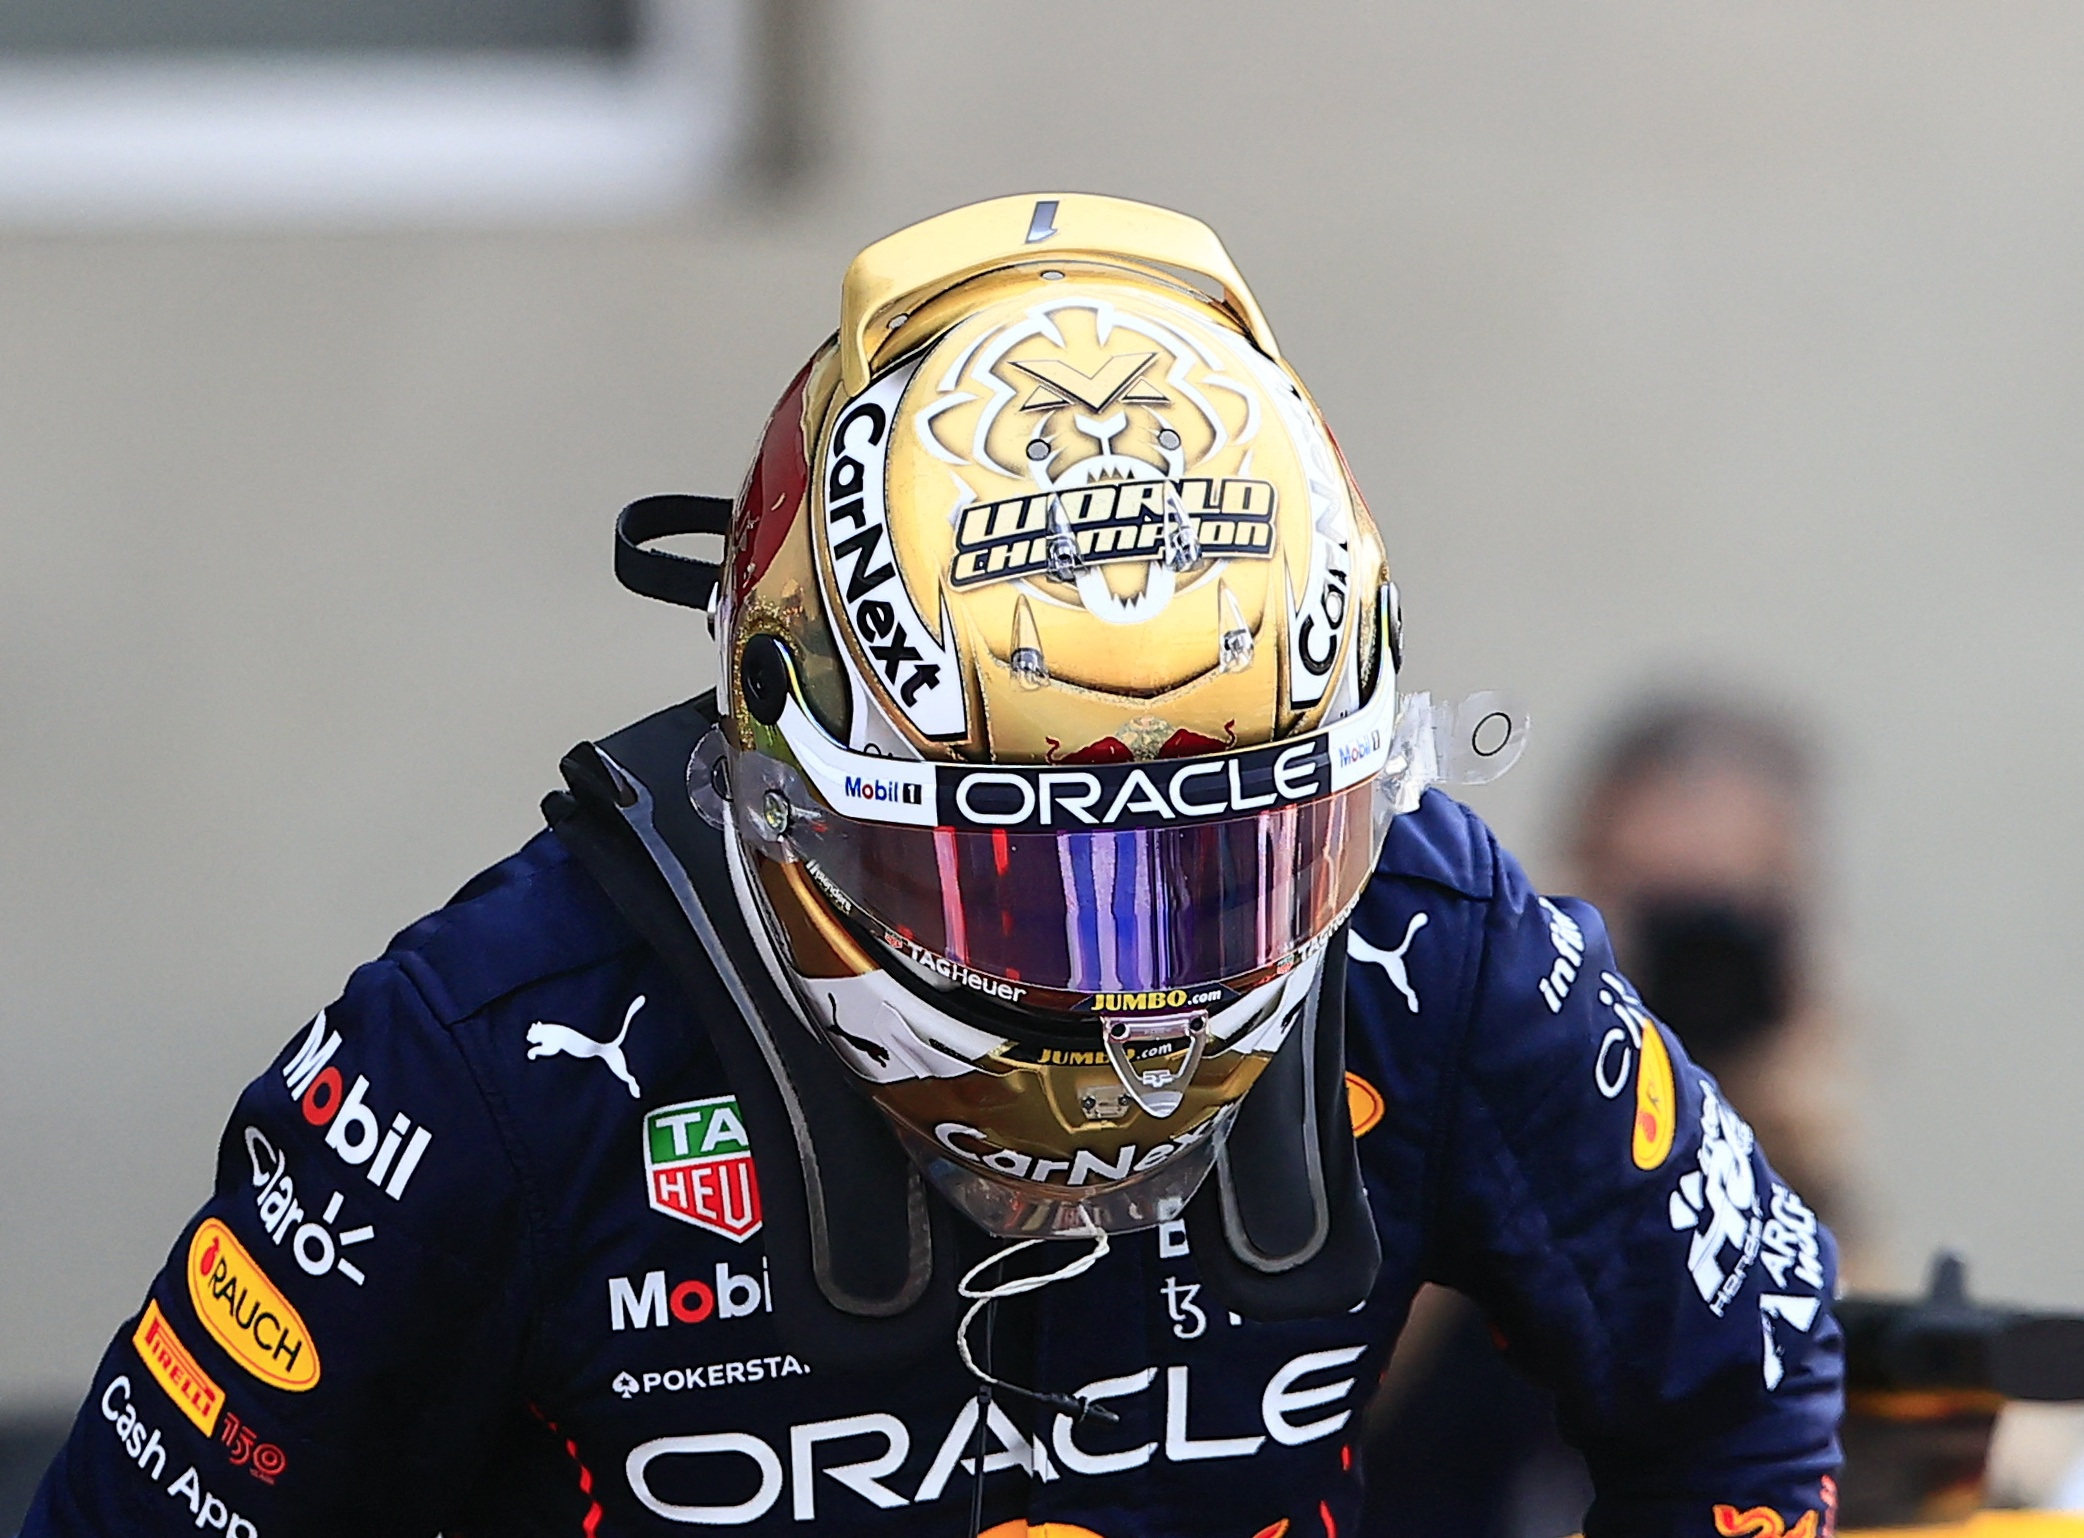 Red Bull’s Max Verstappen qualified in pole position for the Mexican Grand Prix. Photo: Reuters